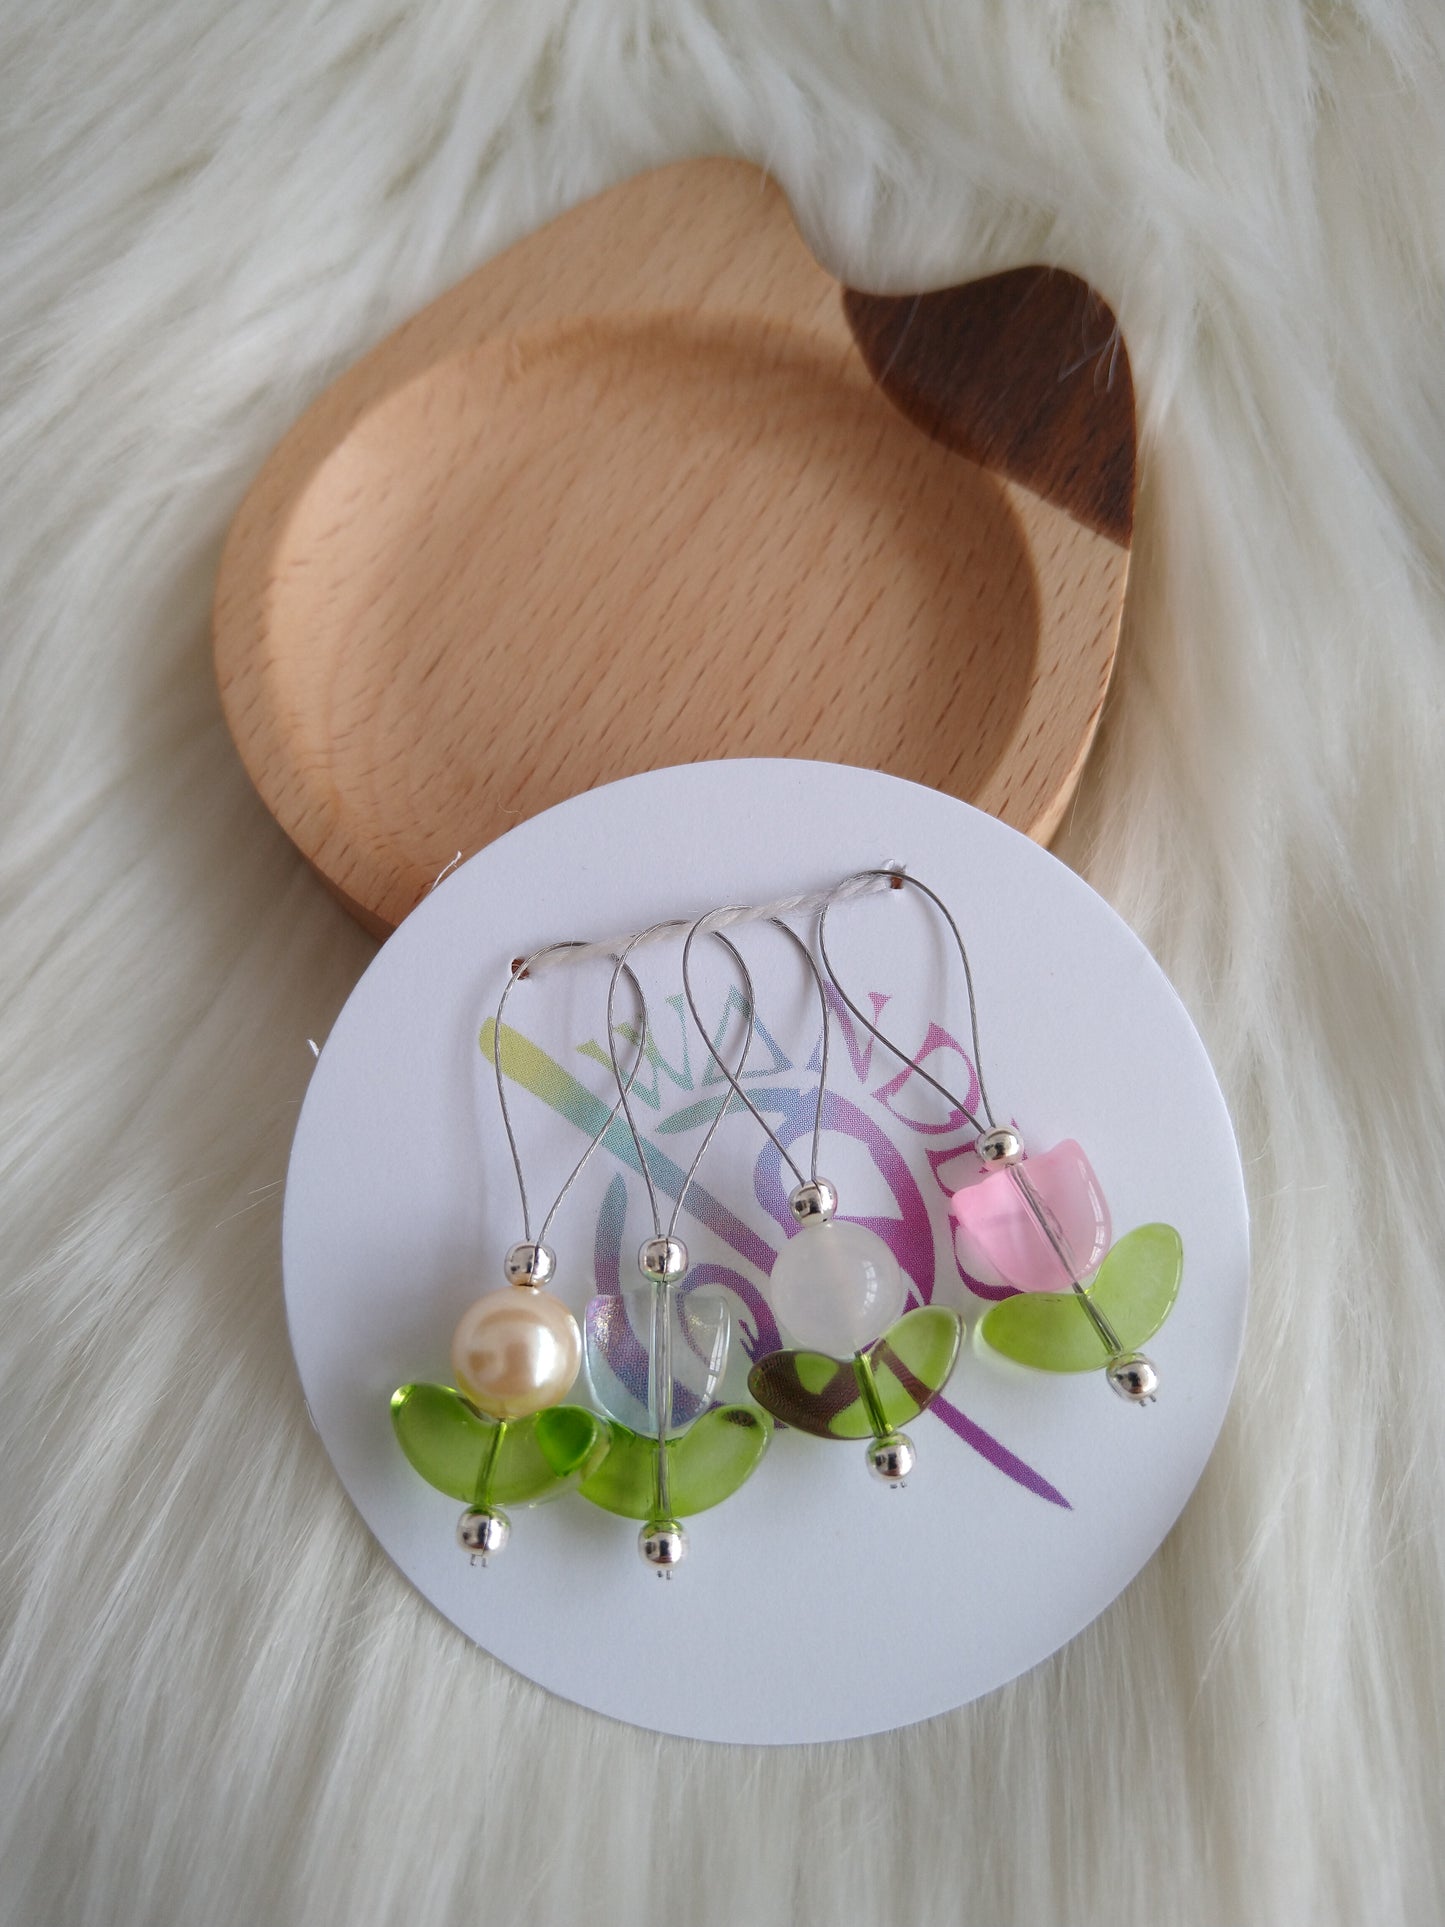 Stitch Markers - Tulips & round flowers, set of 4 (silver wire)